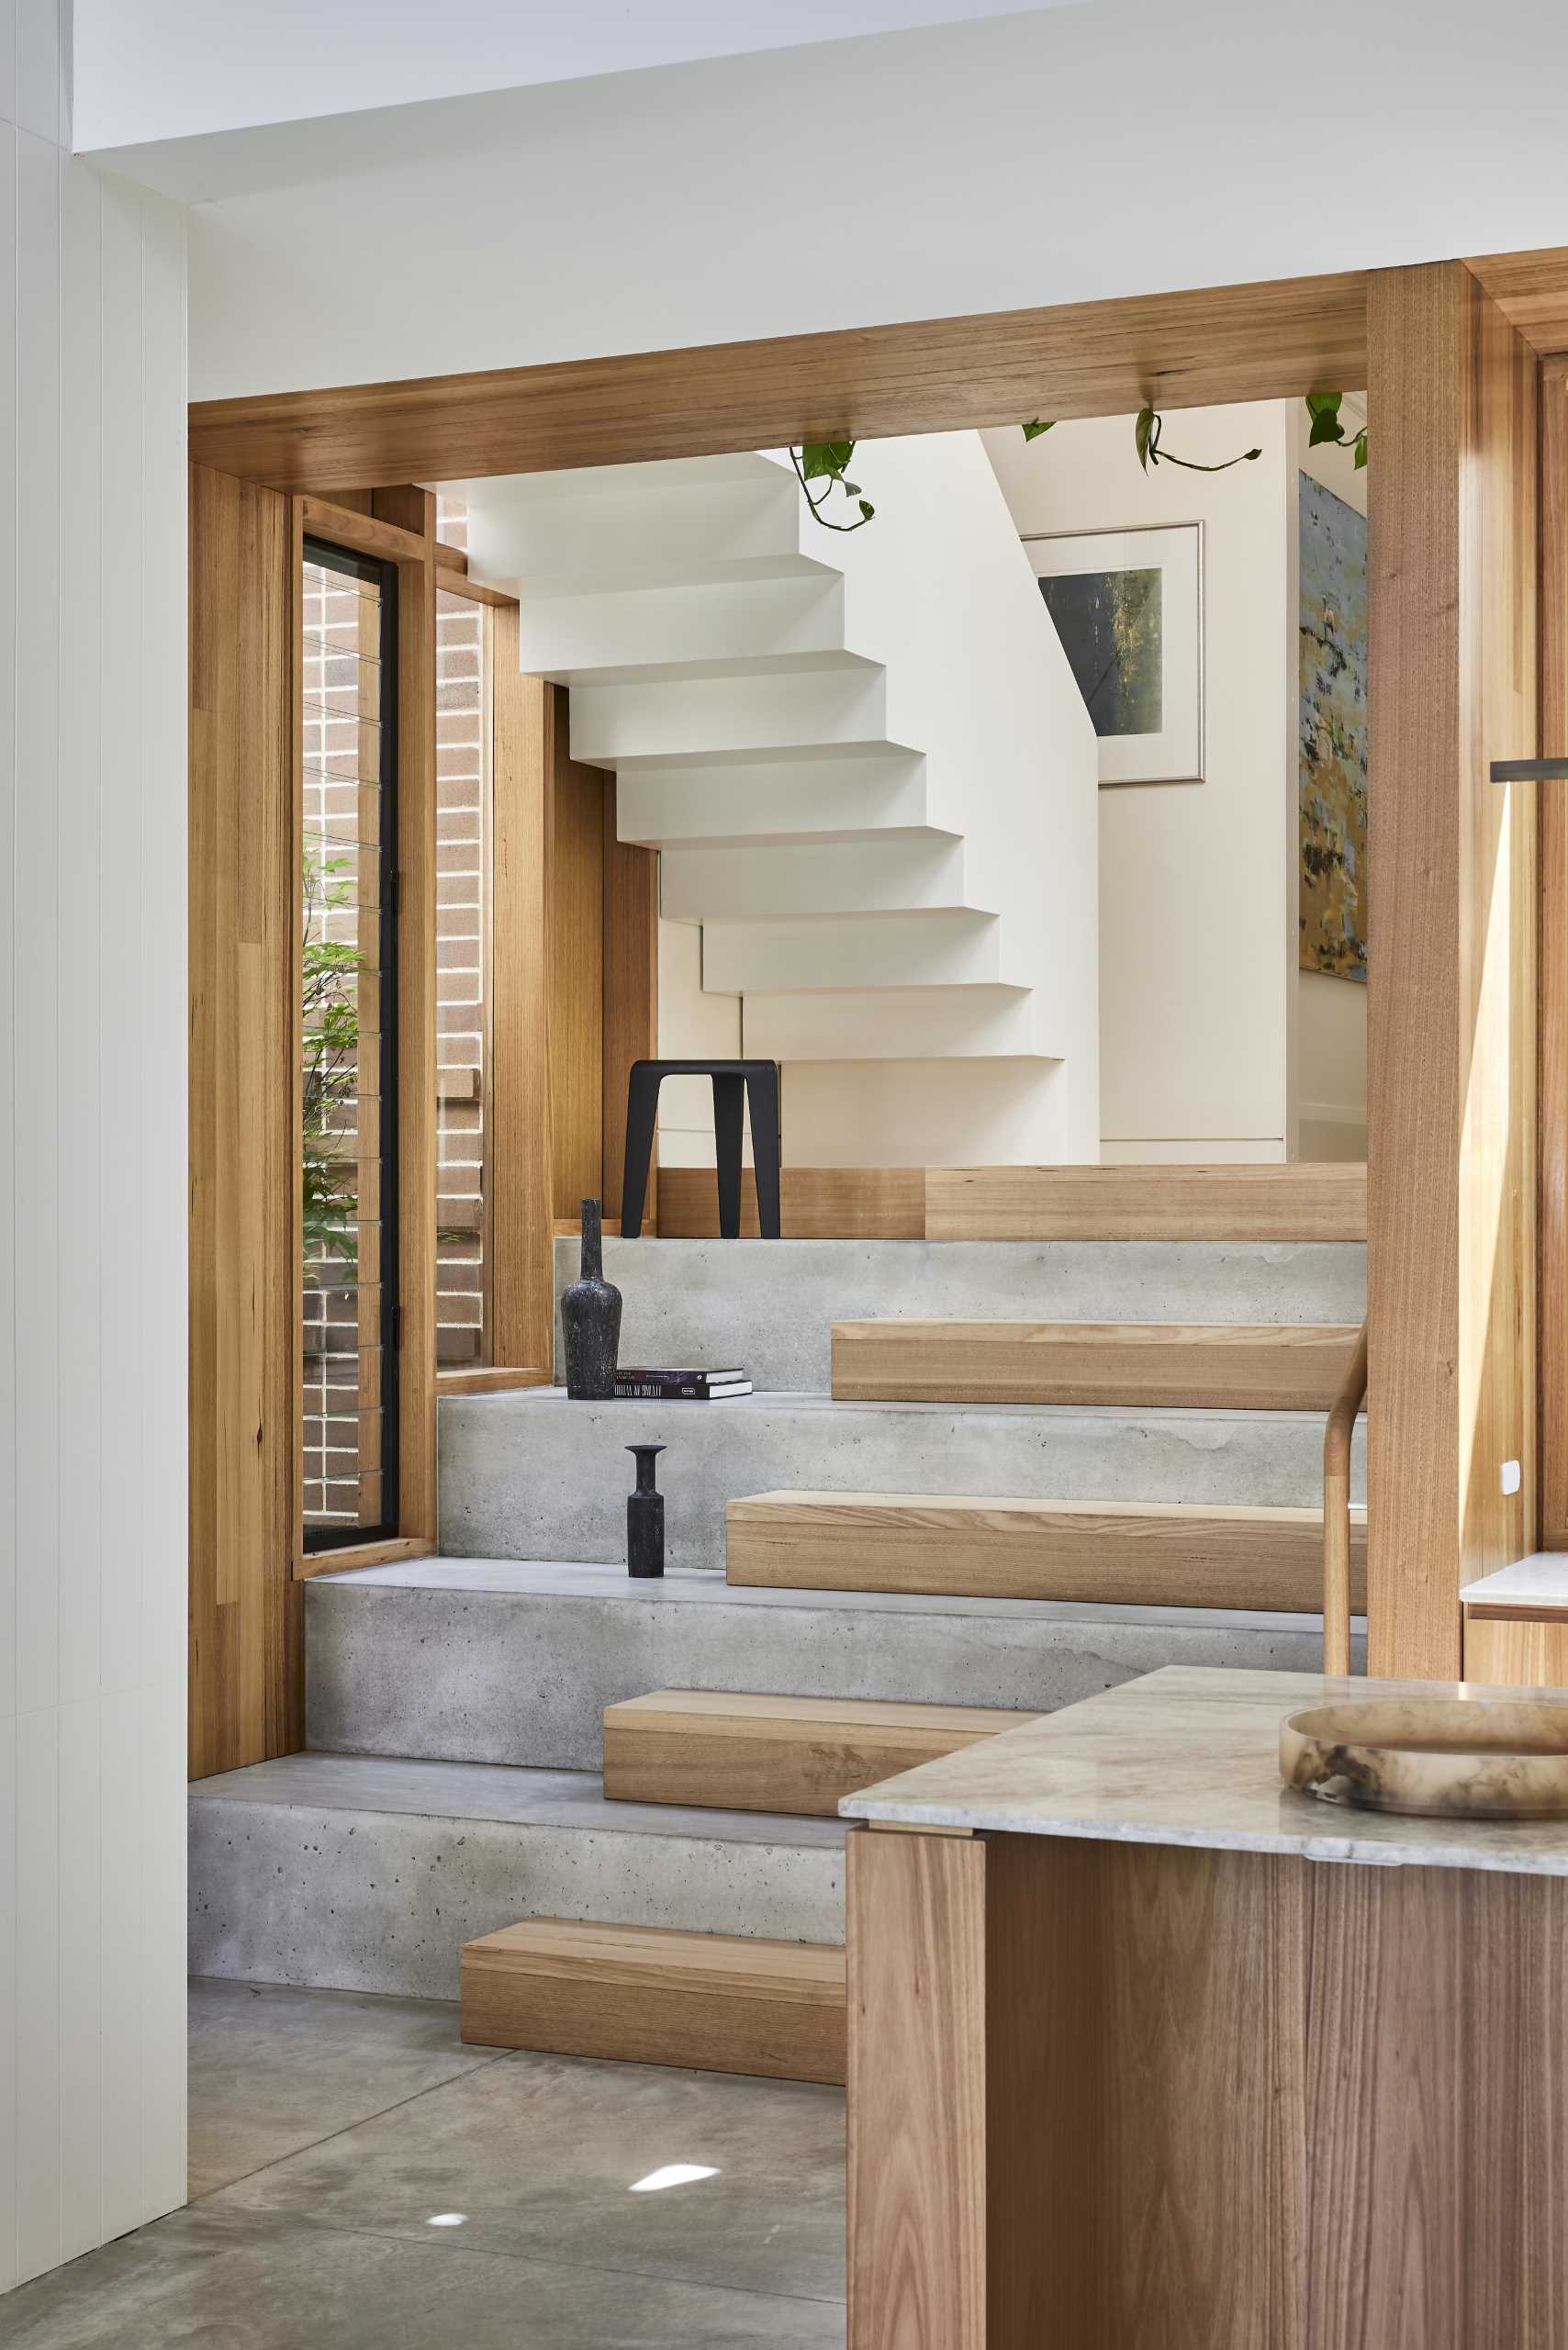 Wood and concrete stairs with white-painted steel handrails connect the new extension with the original home and the upper floor.